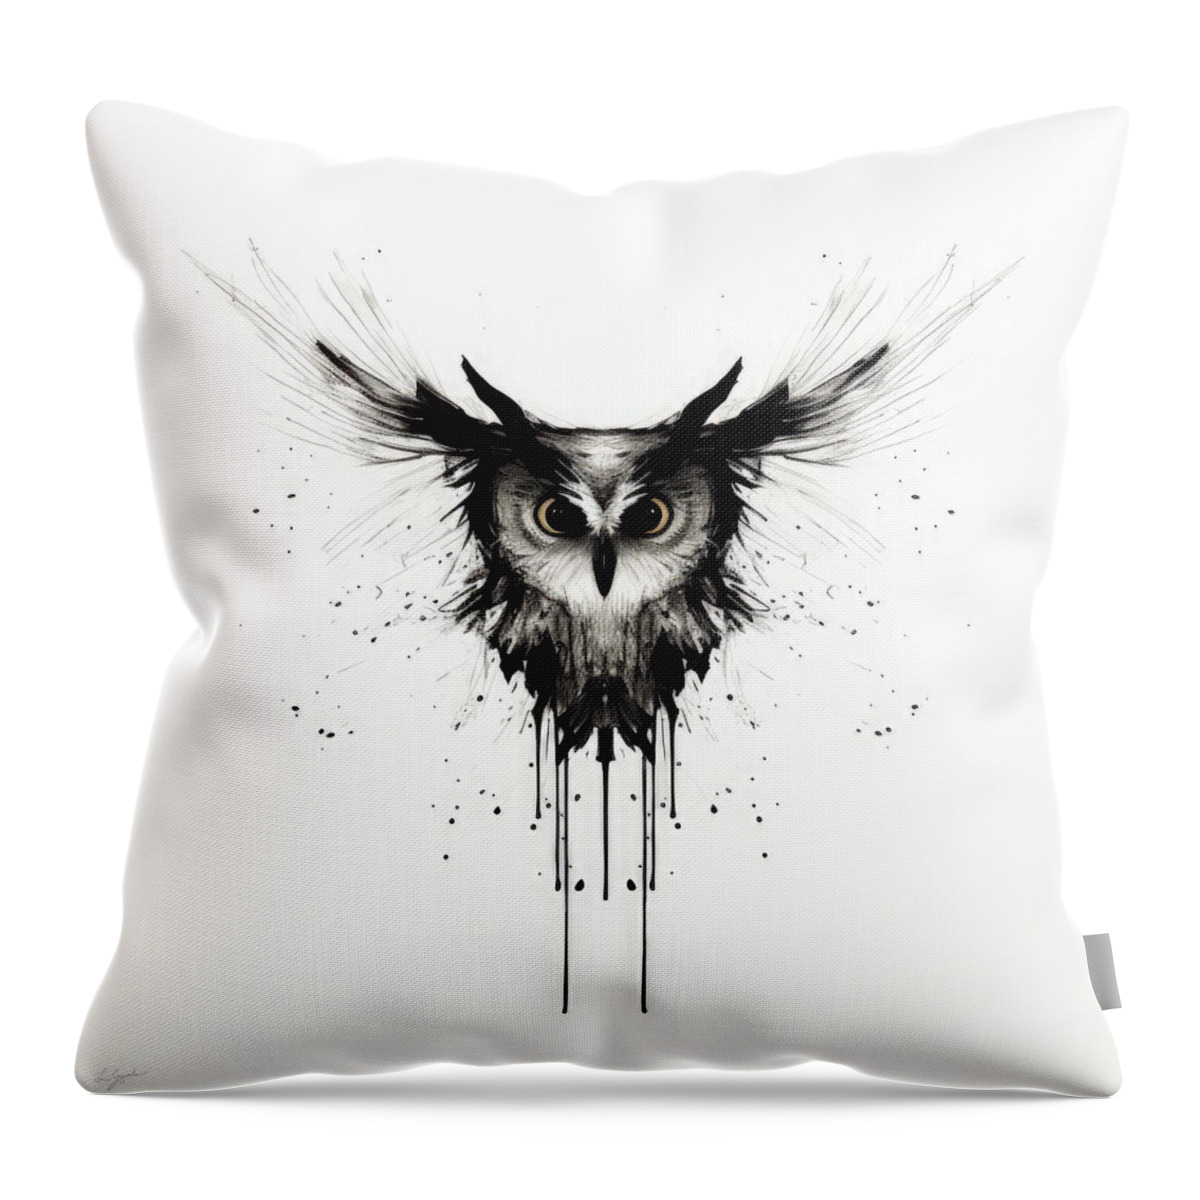 Owl Modern Art Throw Pillow featuring the painting Abstract Owl Art by Lourry Legarde